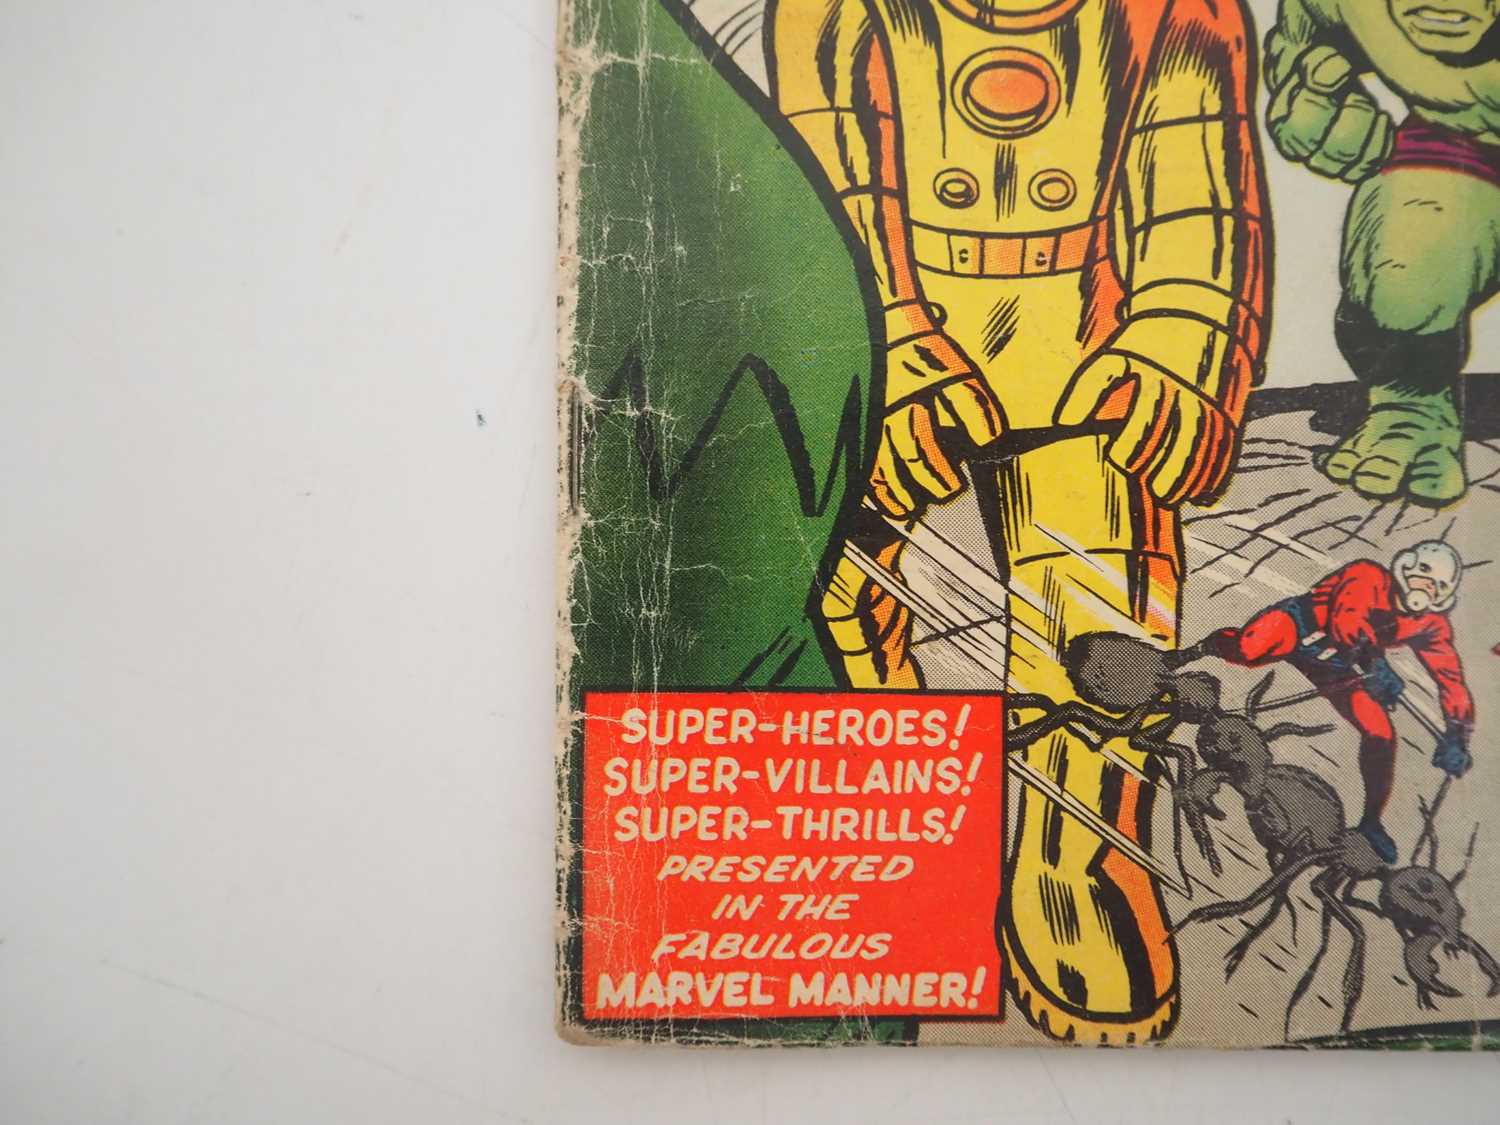 AVENGERS #1 - (1963 - MARVEL - UK Price Variant) - KEY Comic Book - First appearance of the Avengers - Image 5 of 29